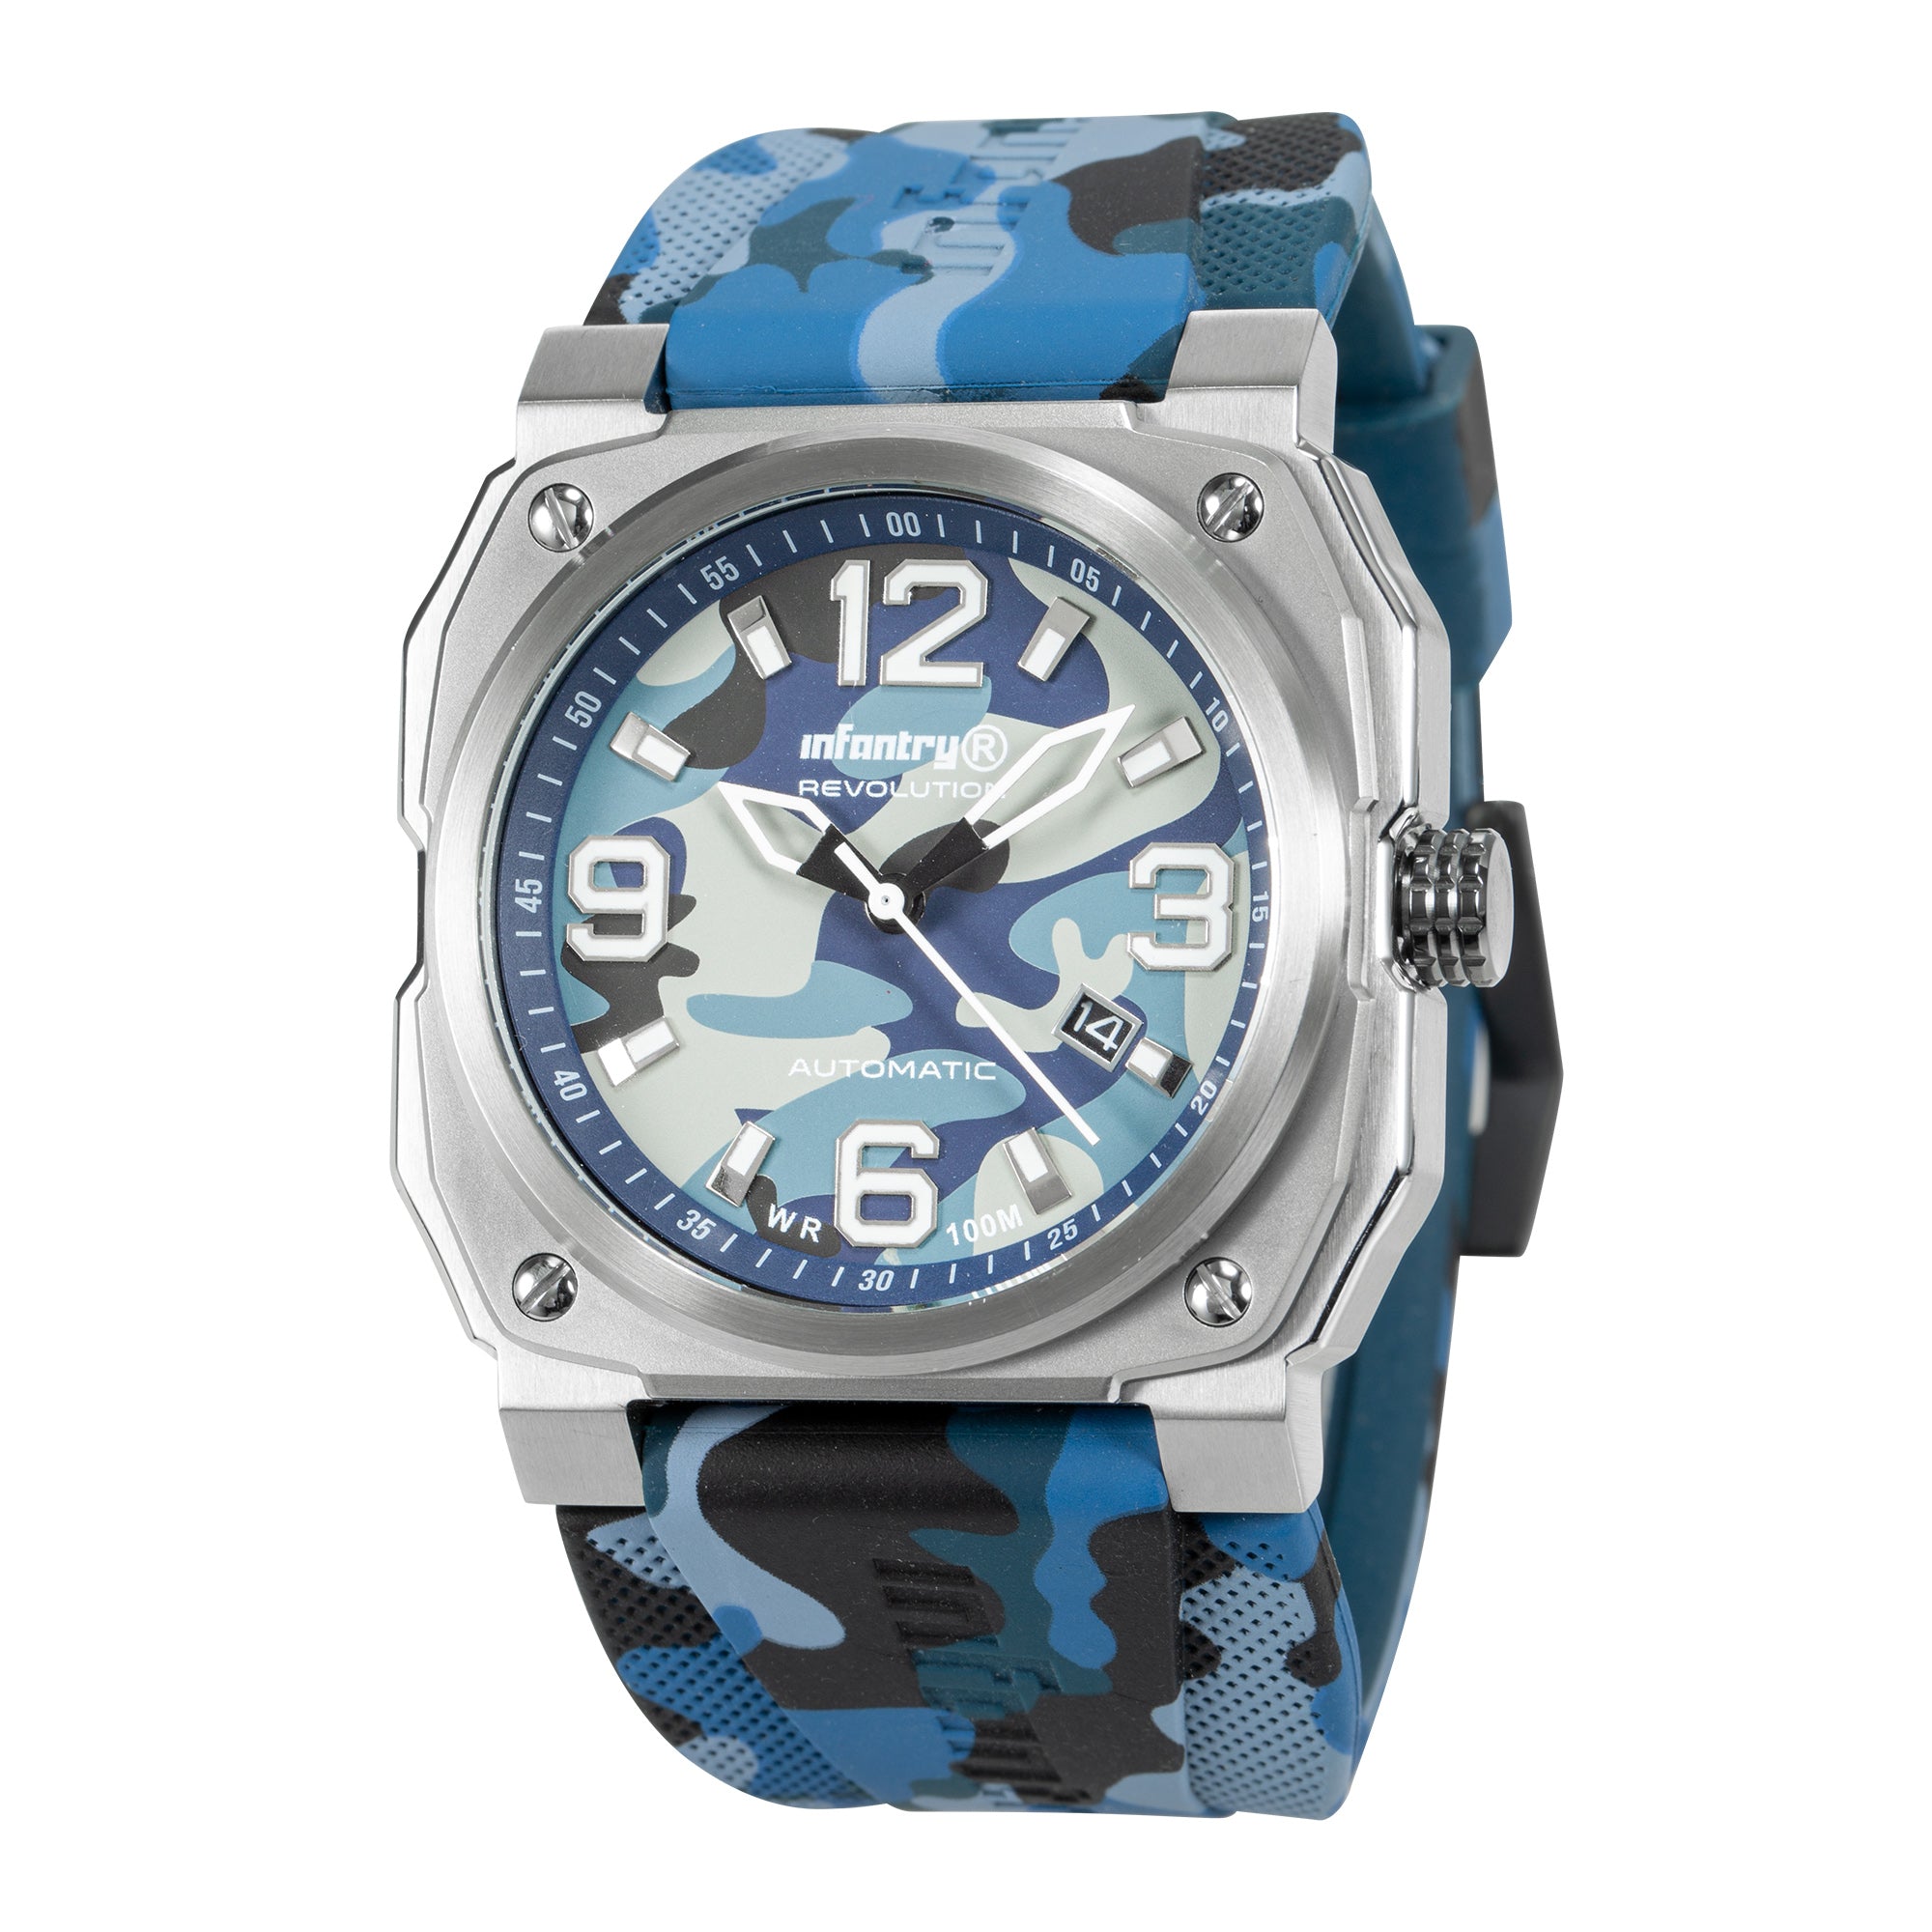 MOD 47 - The Warrior (Blue camouflage)